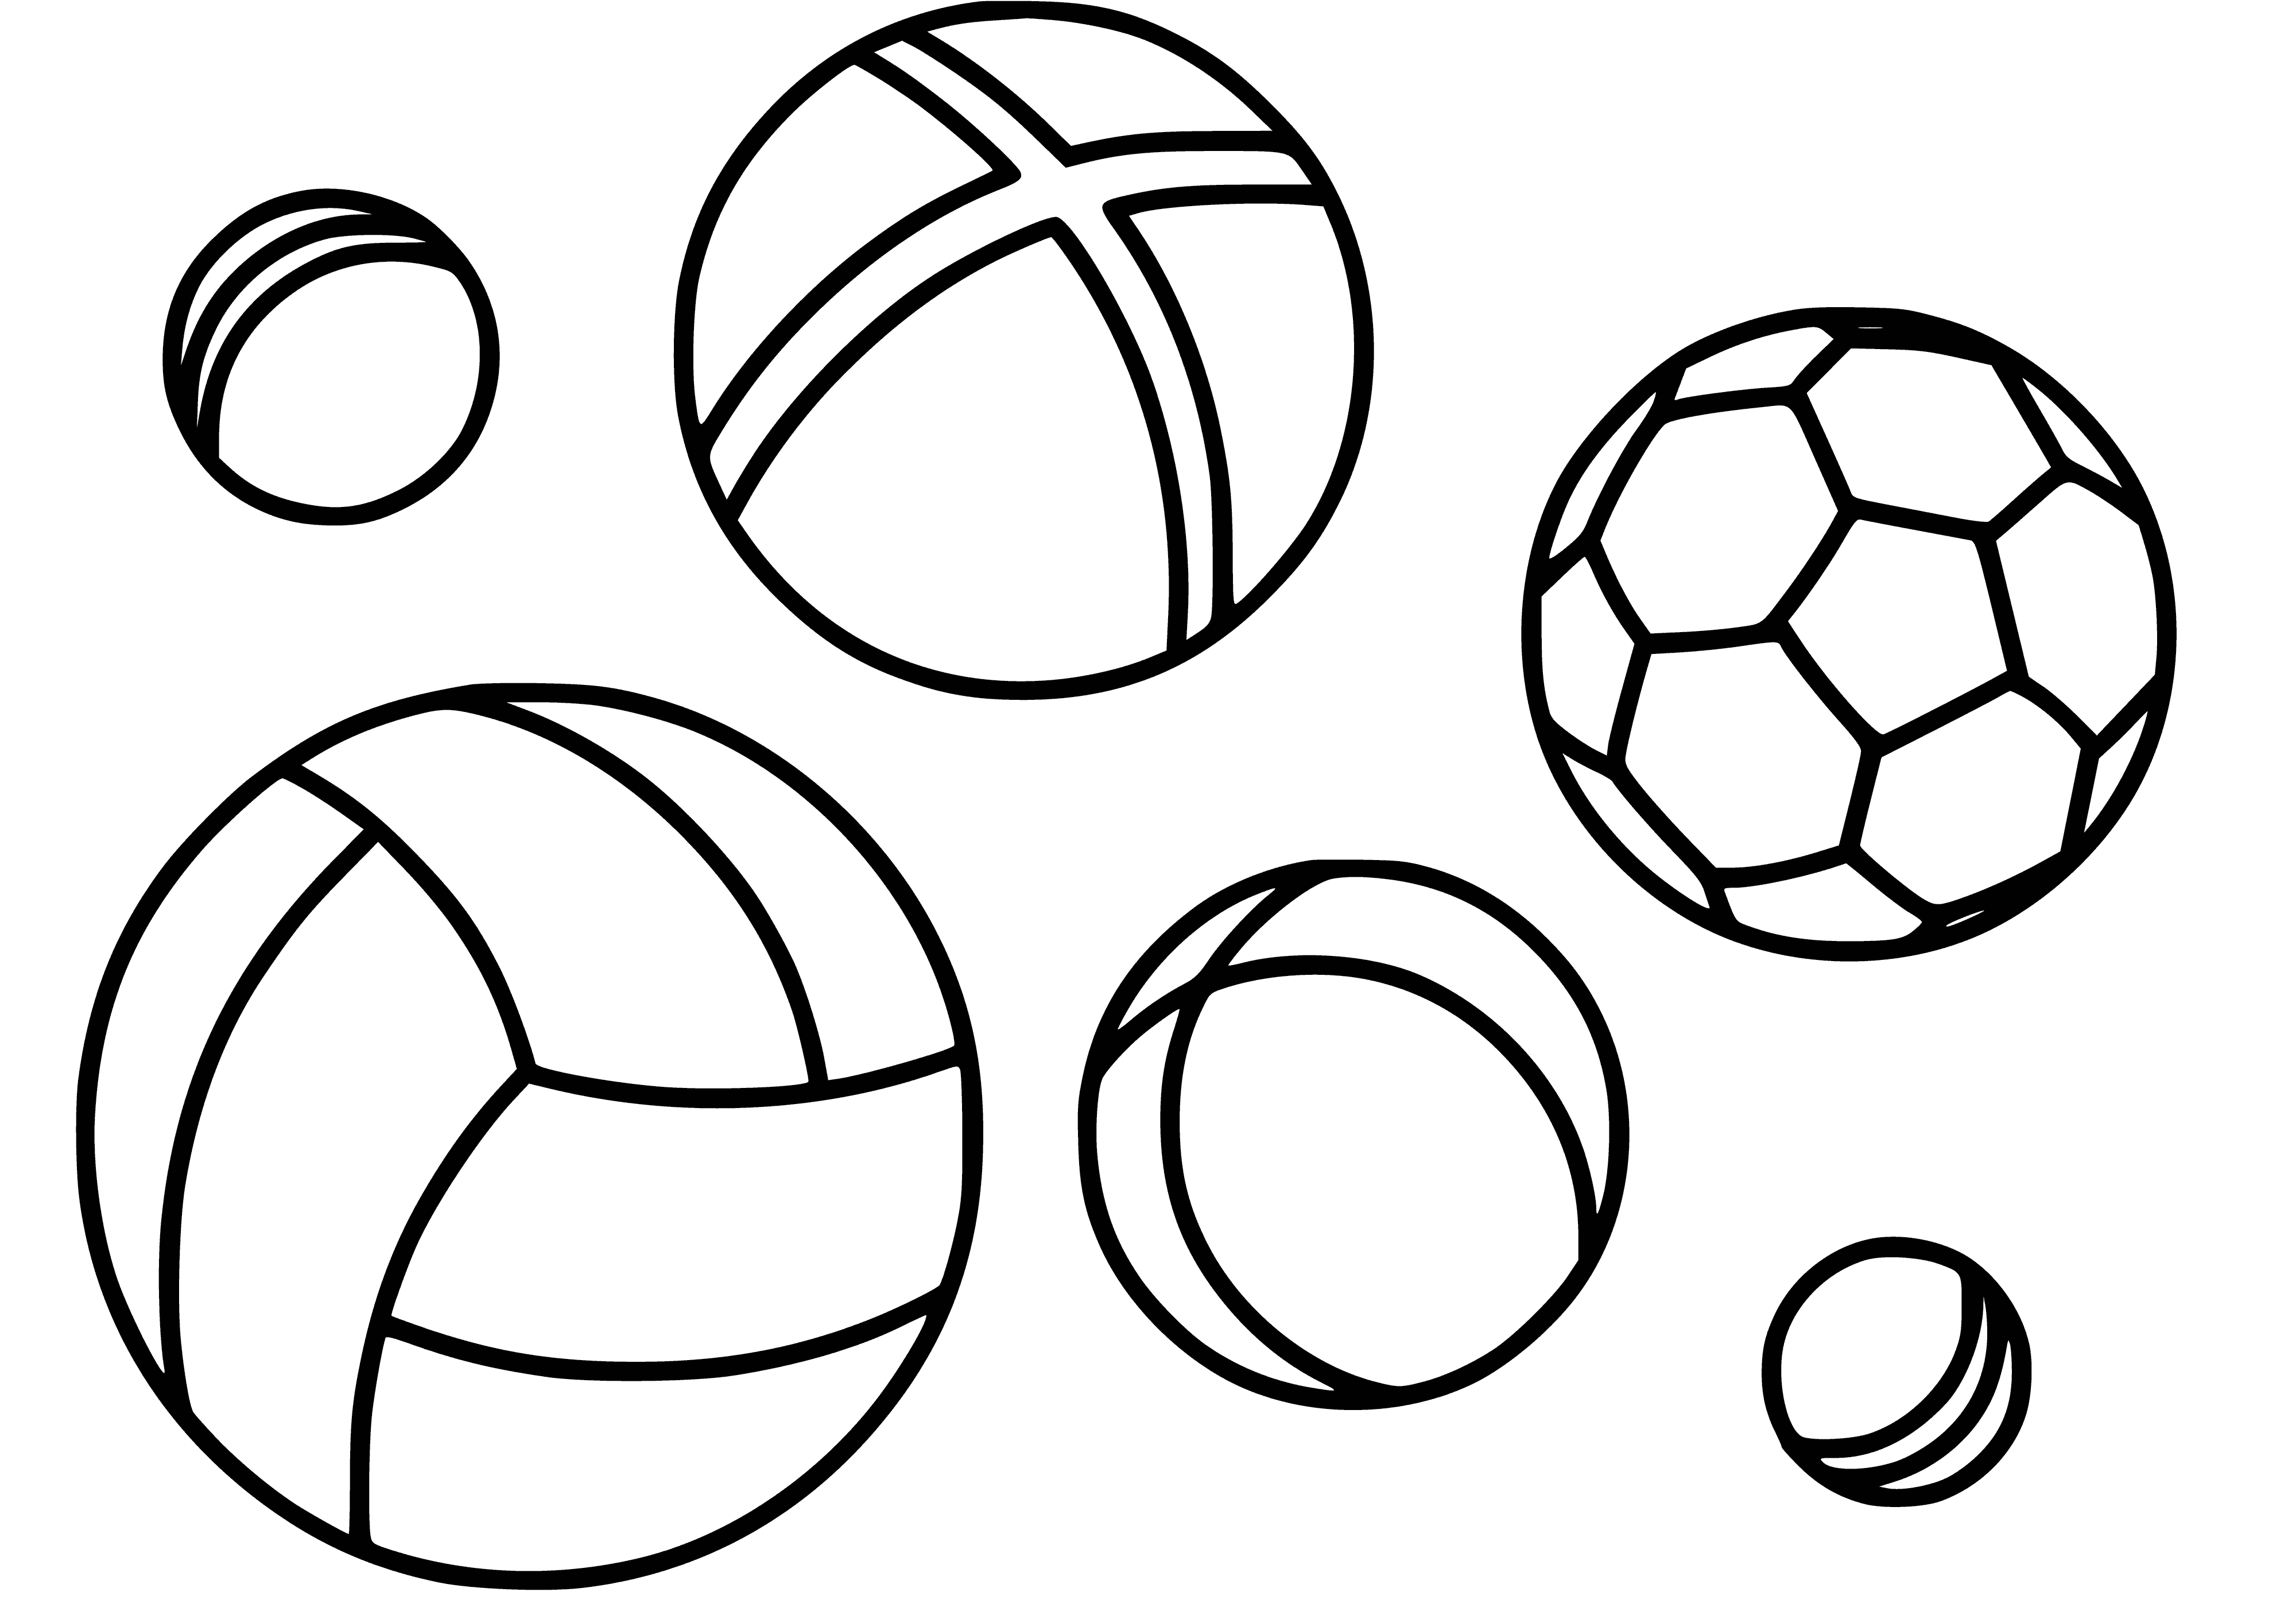 coloring page: 3 balls, blue w/ stripes, green w/ dots, yellow w/ squiggles. Each has a different design.